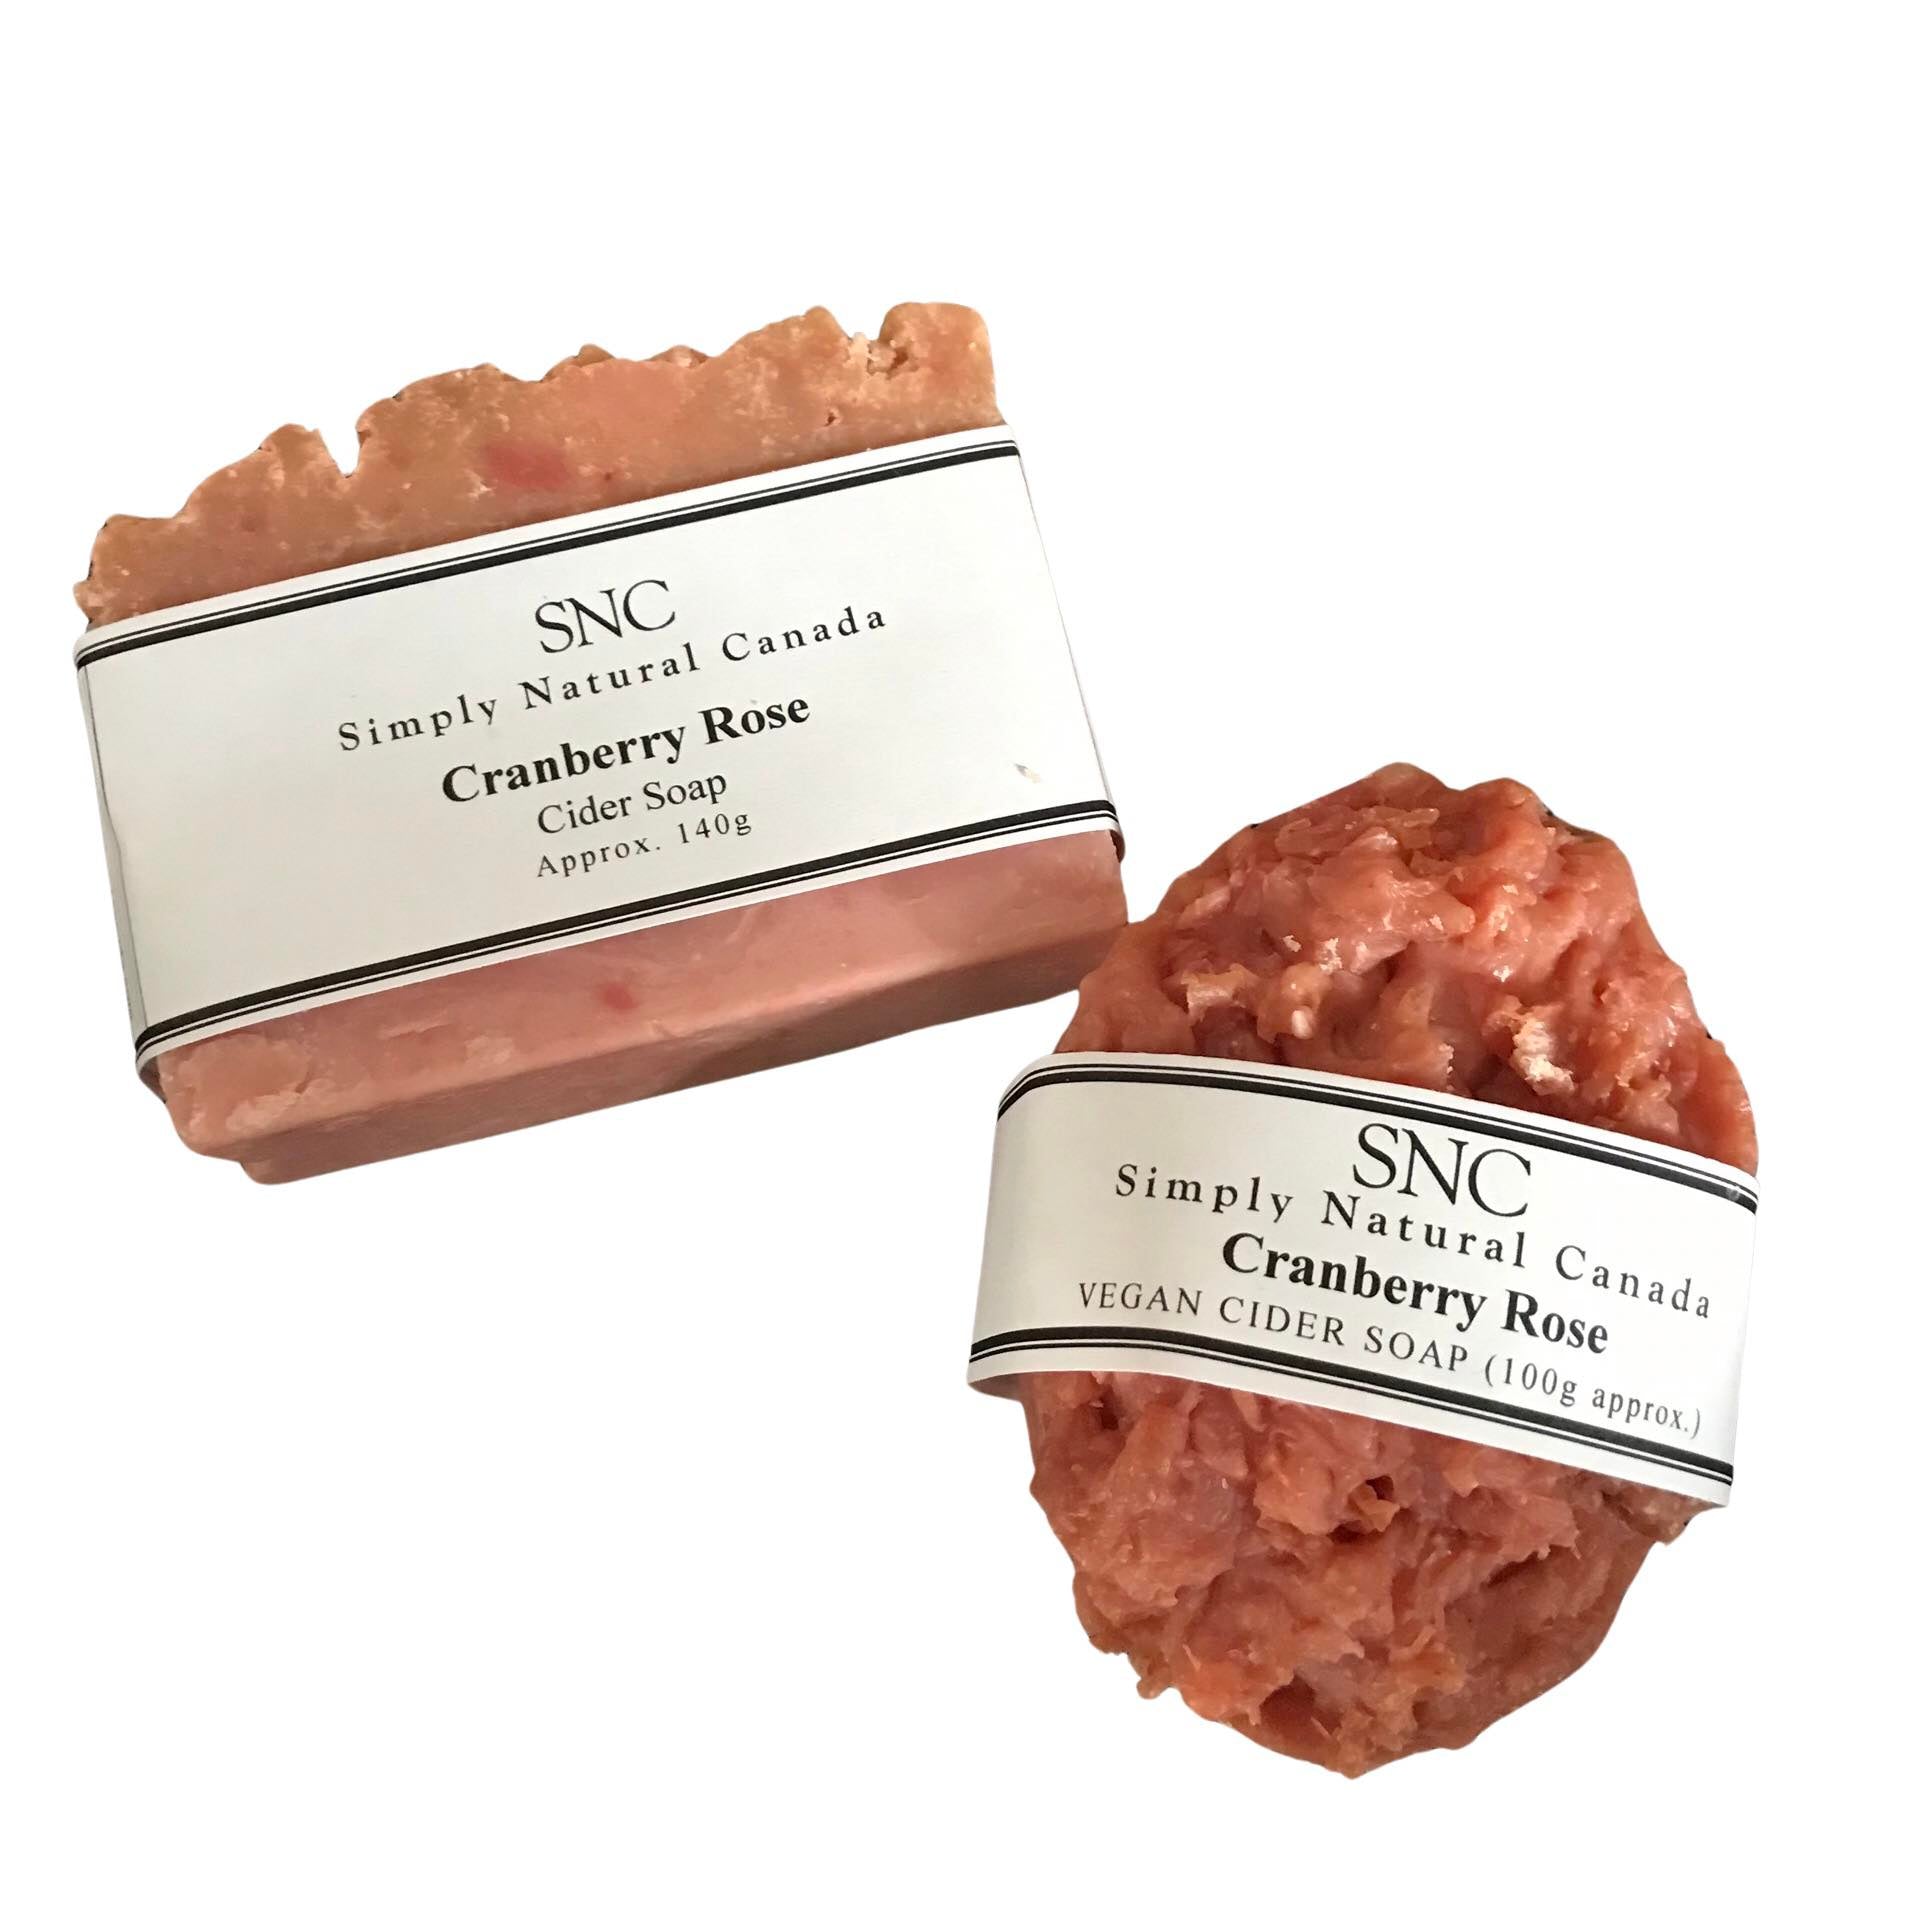 Simply Natural Canada cranberry rose vegan cider soap made in Canada with Ontario cranberry apple cider 